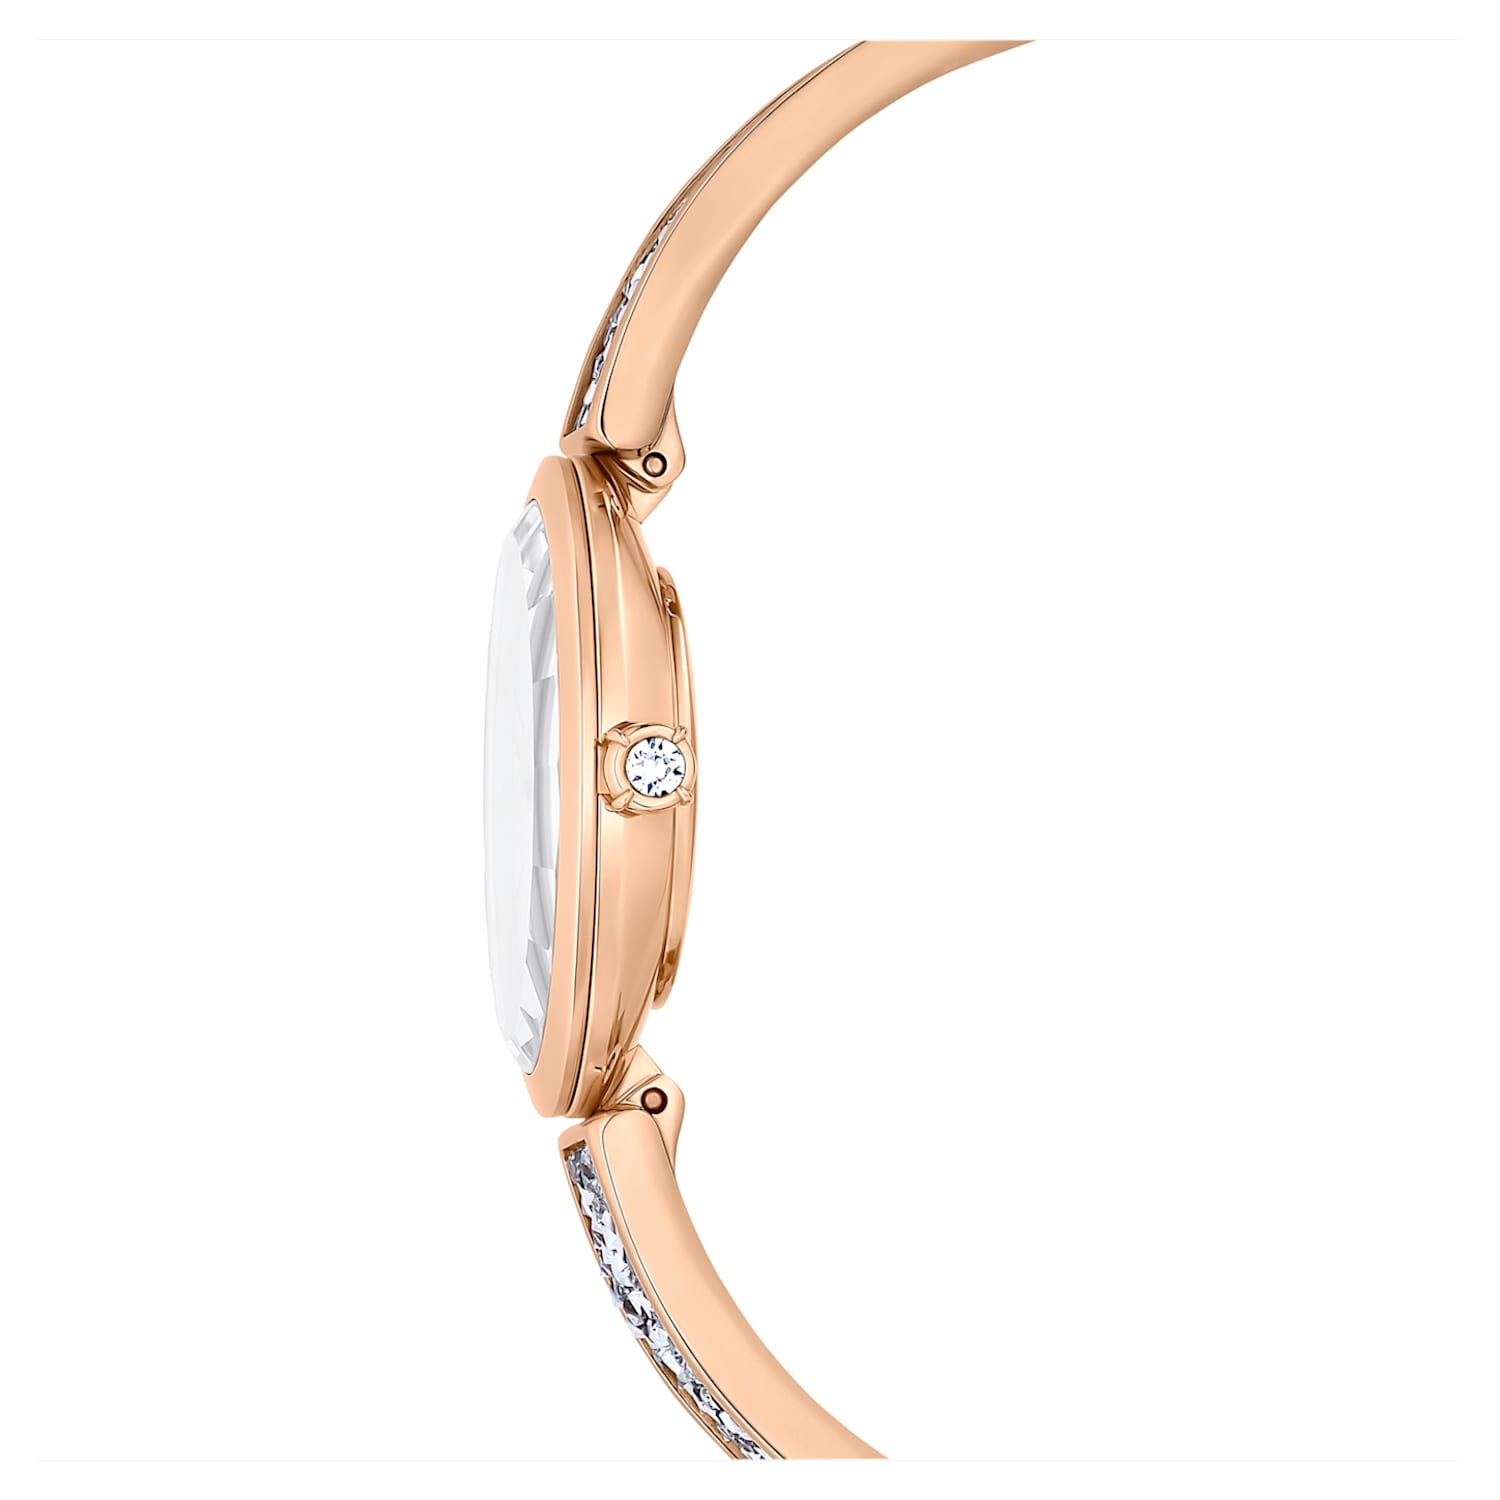 Bungalow reckless order Crystal Rock Oval watch, Swiss Made, Metal bracelet, Rose gold tone, Rose  gold-tone finish